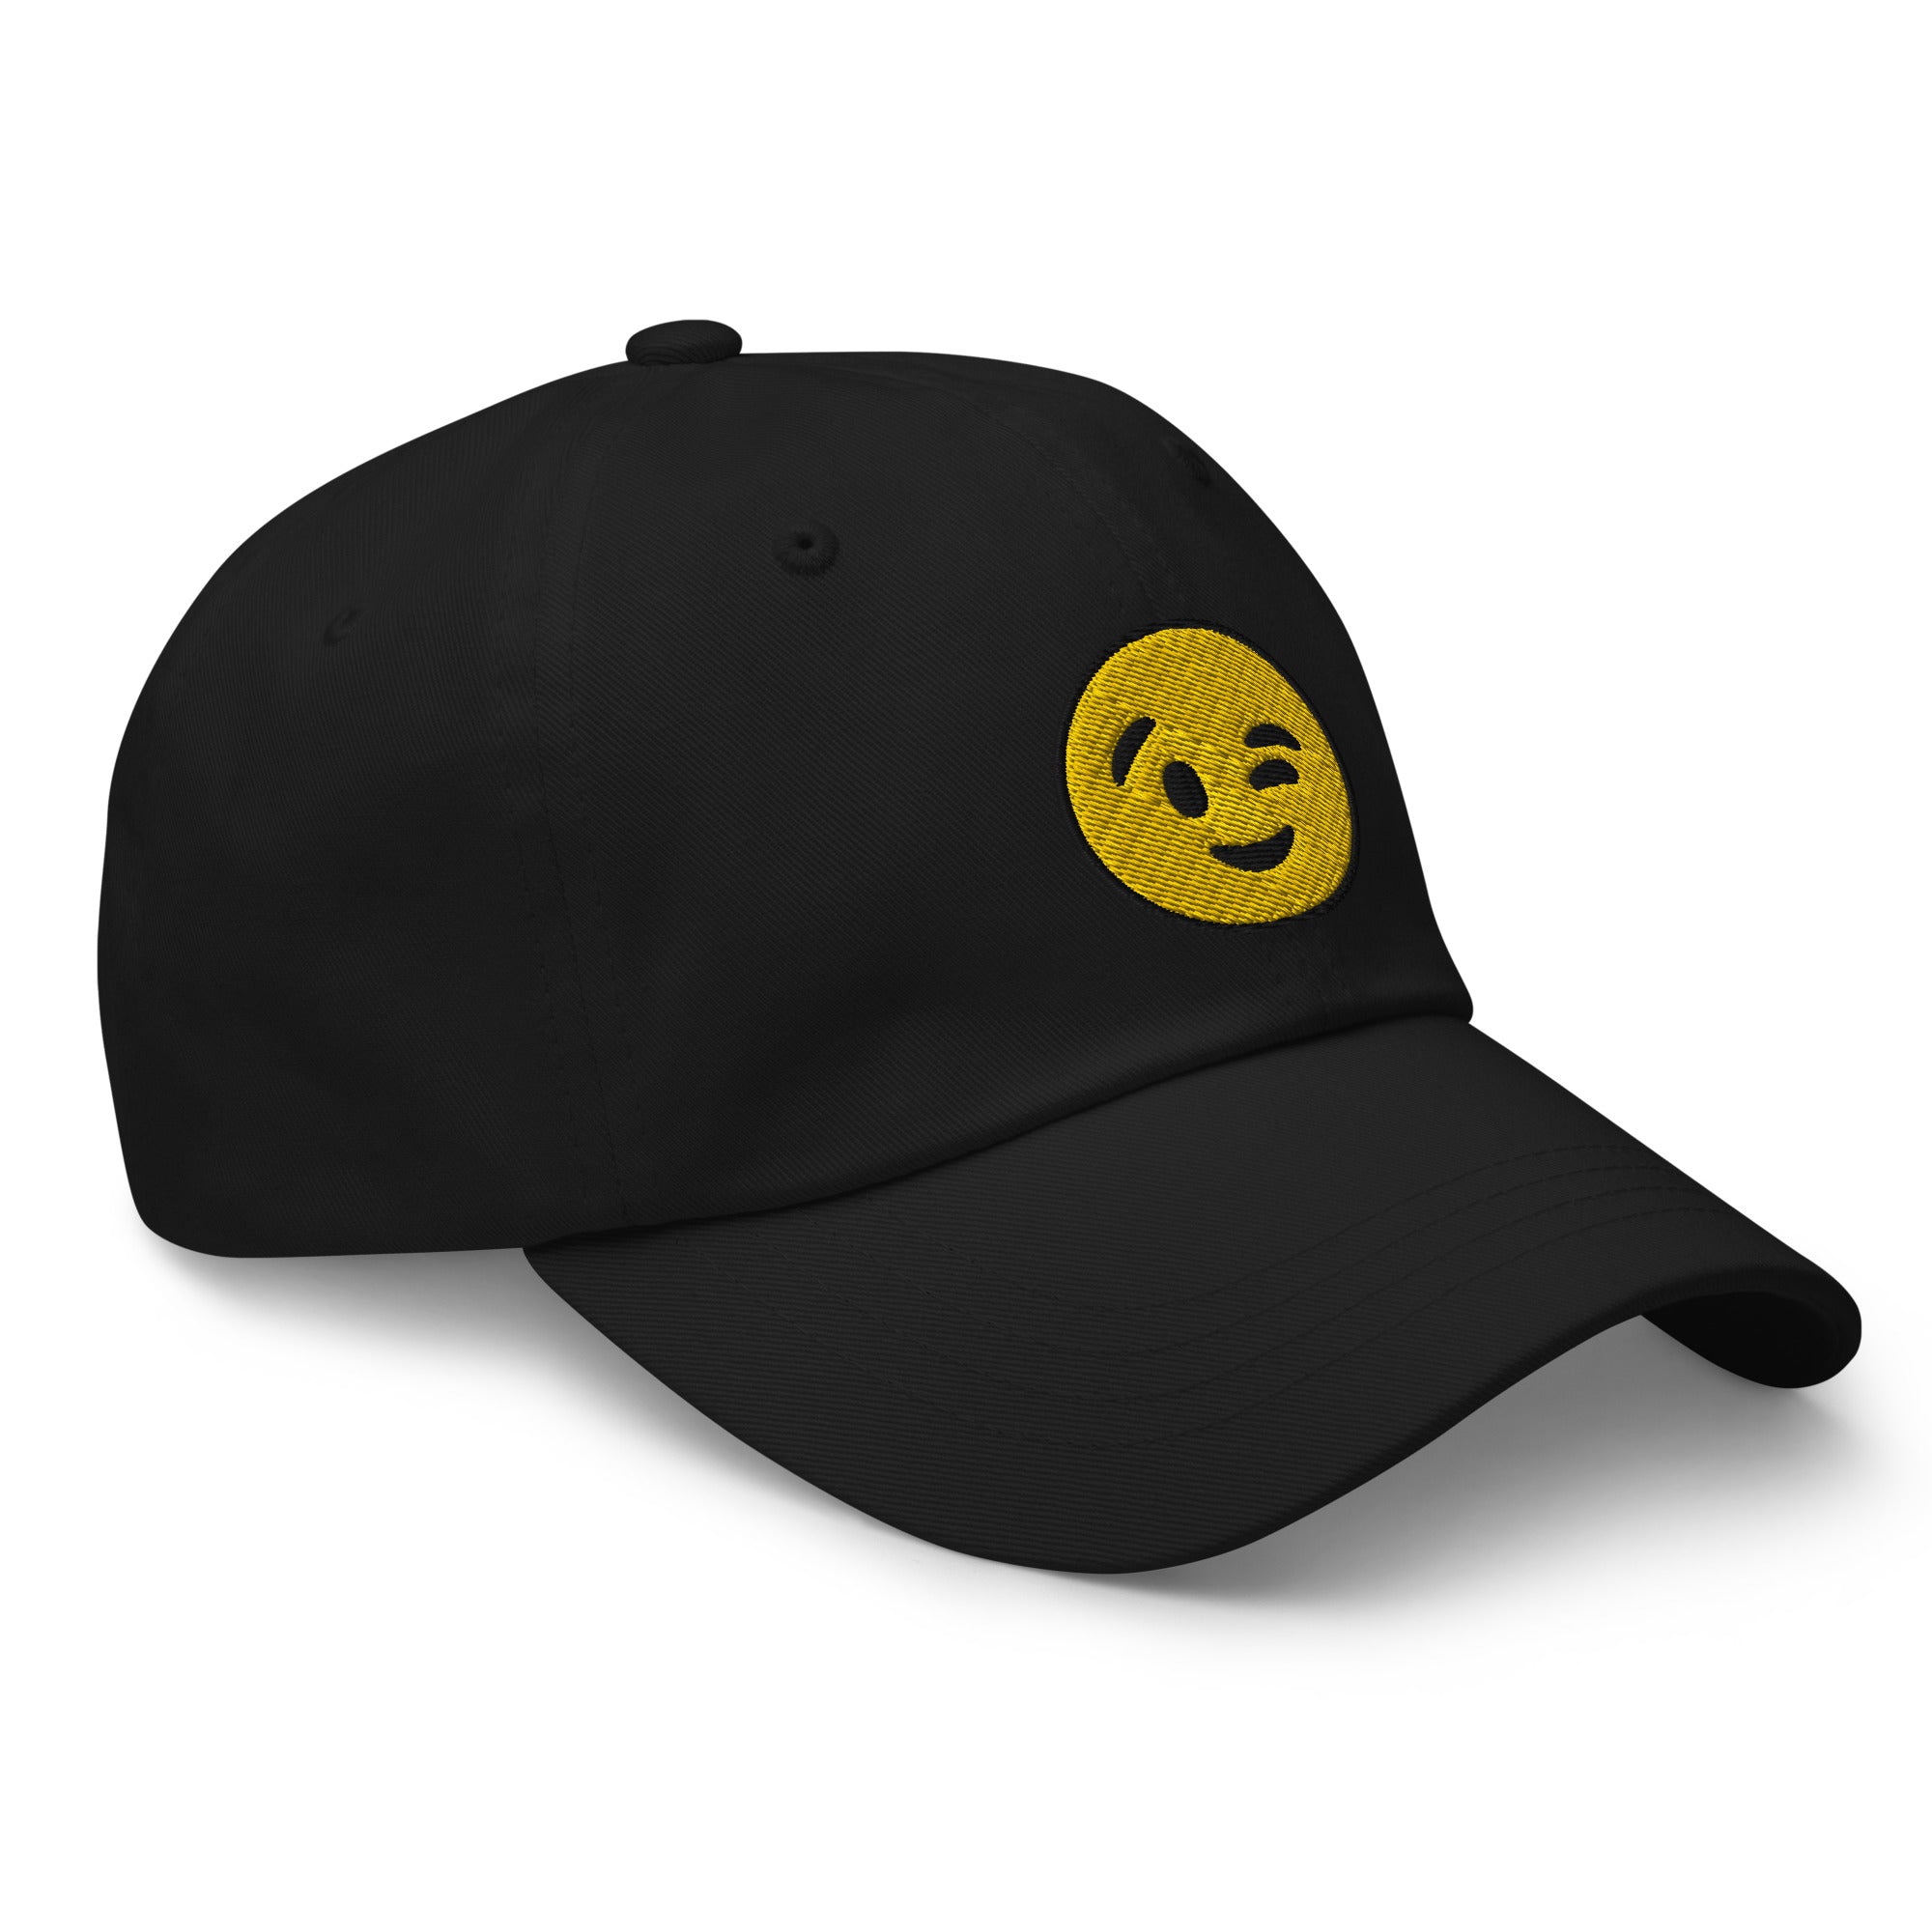 Winking Face Emoji Embroidered Baseball Cap Wink Emoticon Dad hat - Edge of Life Designs